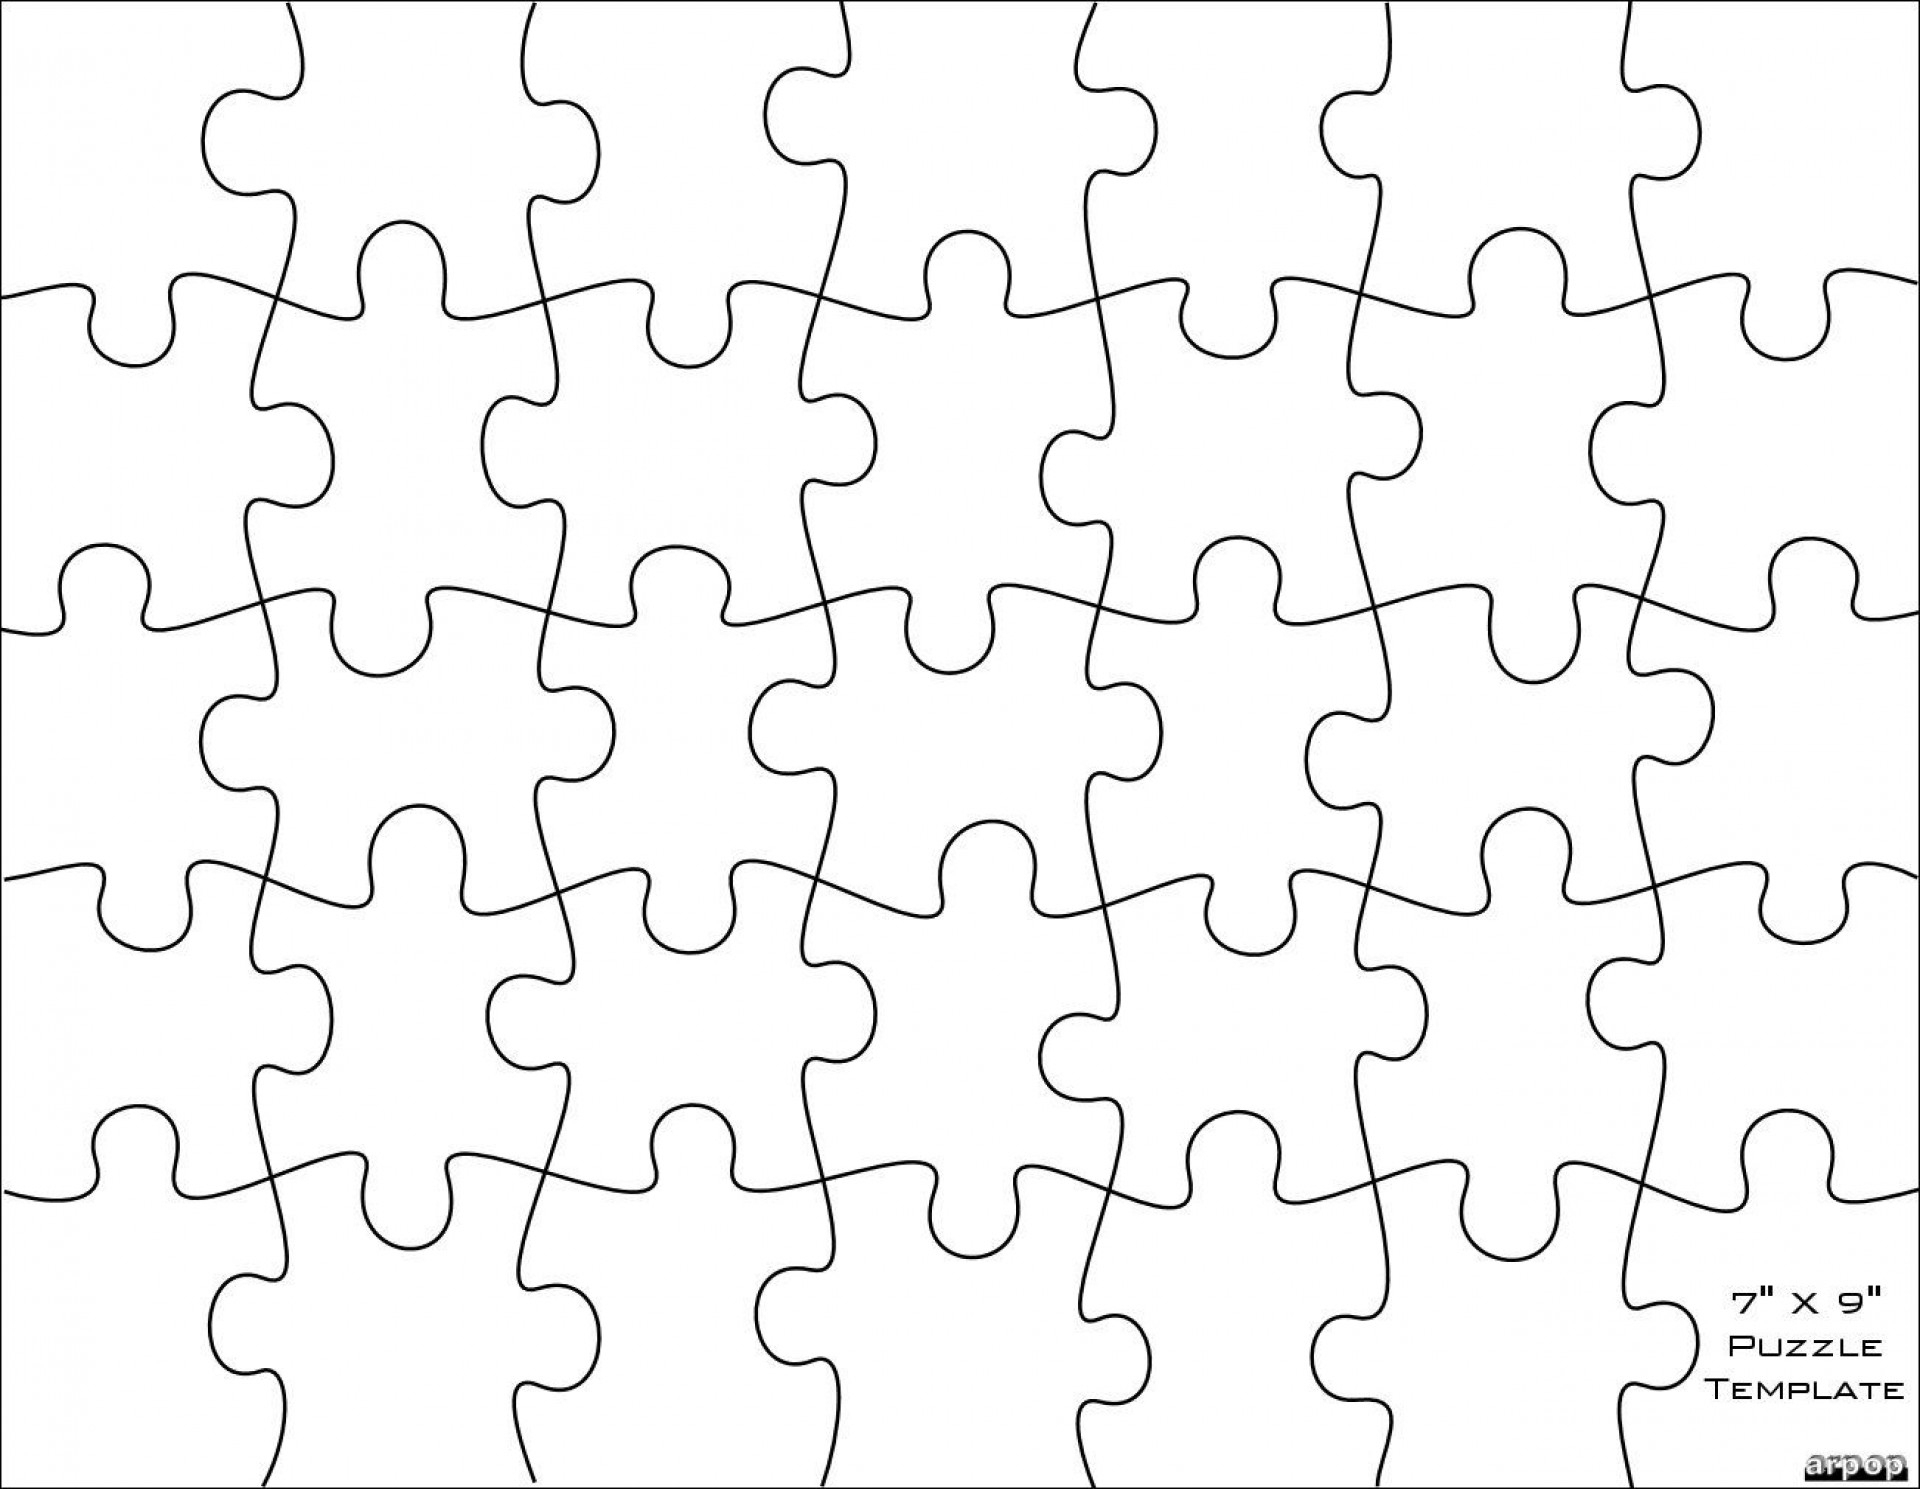 Printable Jigsaw Puzzles Maker